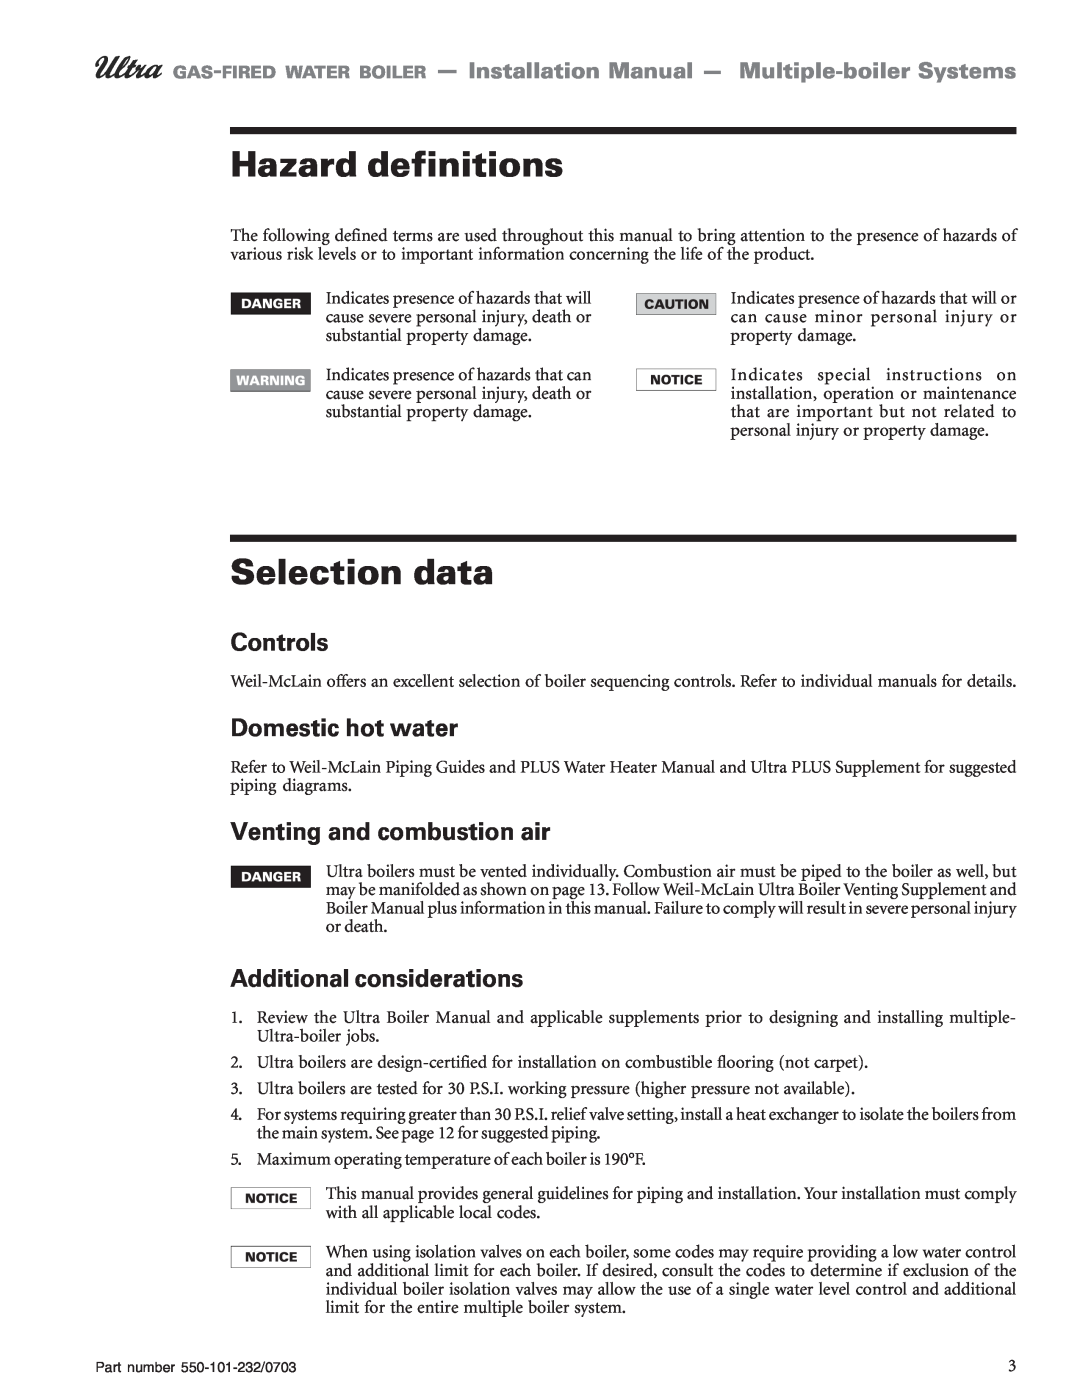 Weil-McLain Boiler Hazard definitions, Selection data, Controls, Domestic hot water, Venting and combustion air 